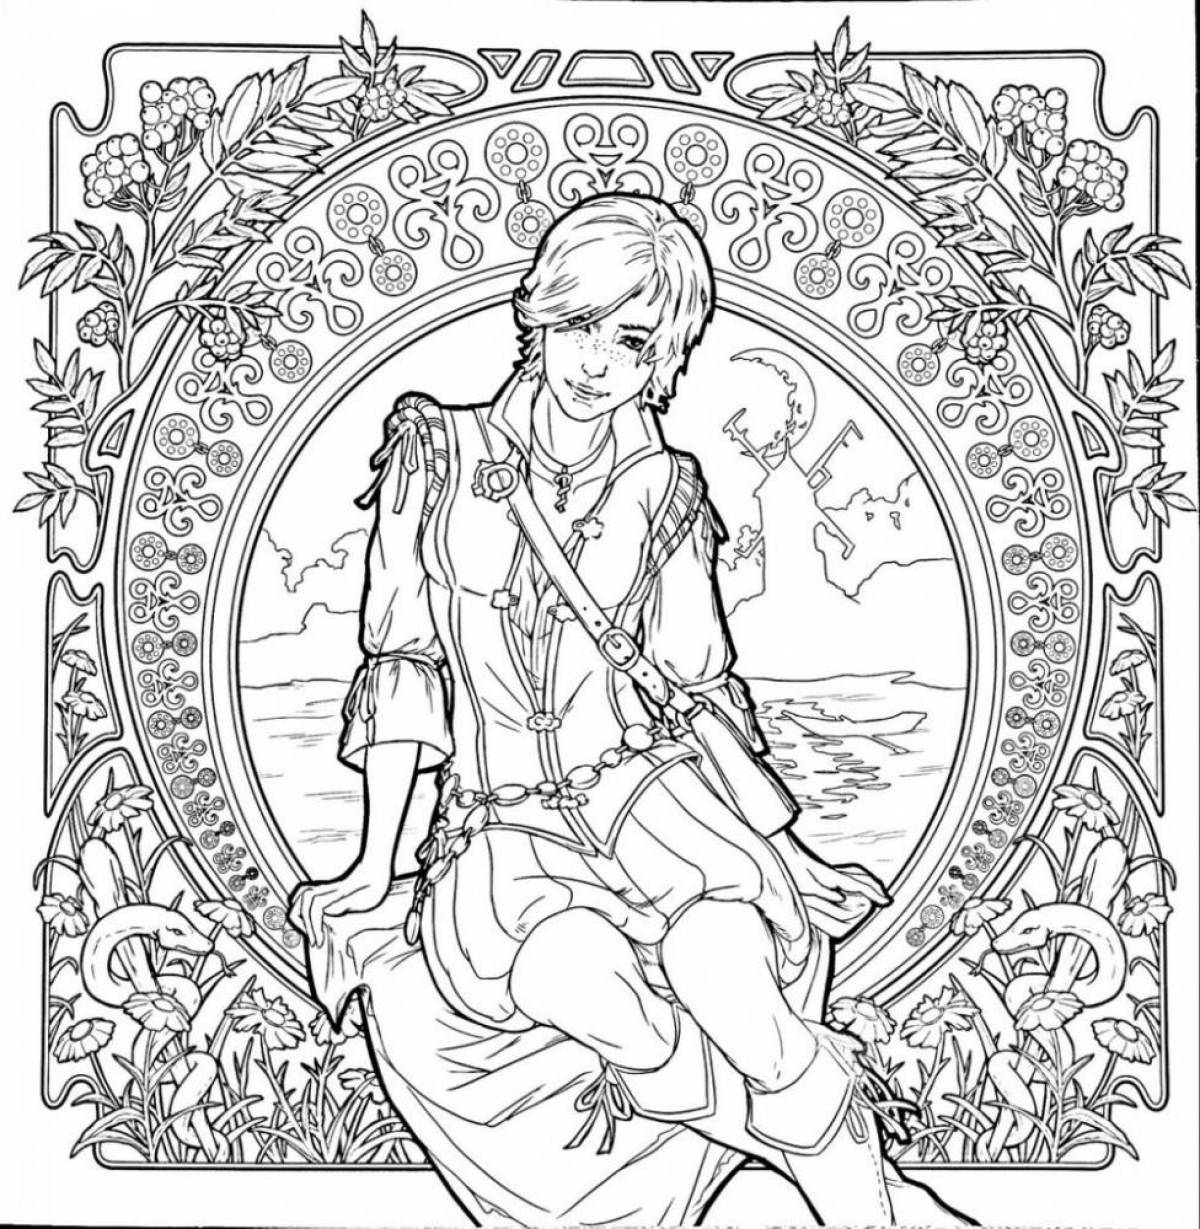 Charming witcher coloring book